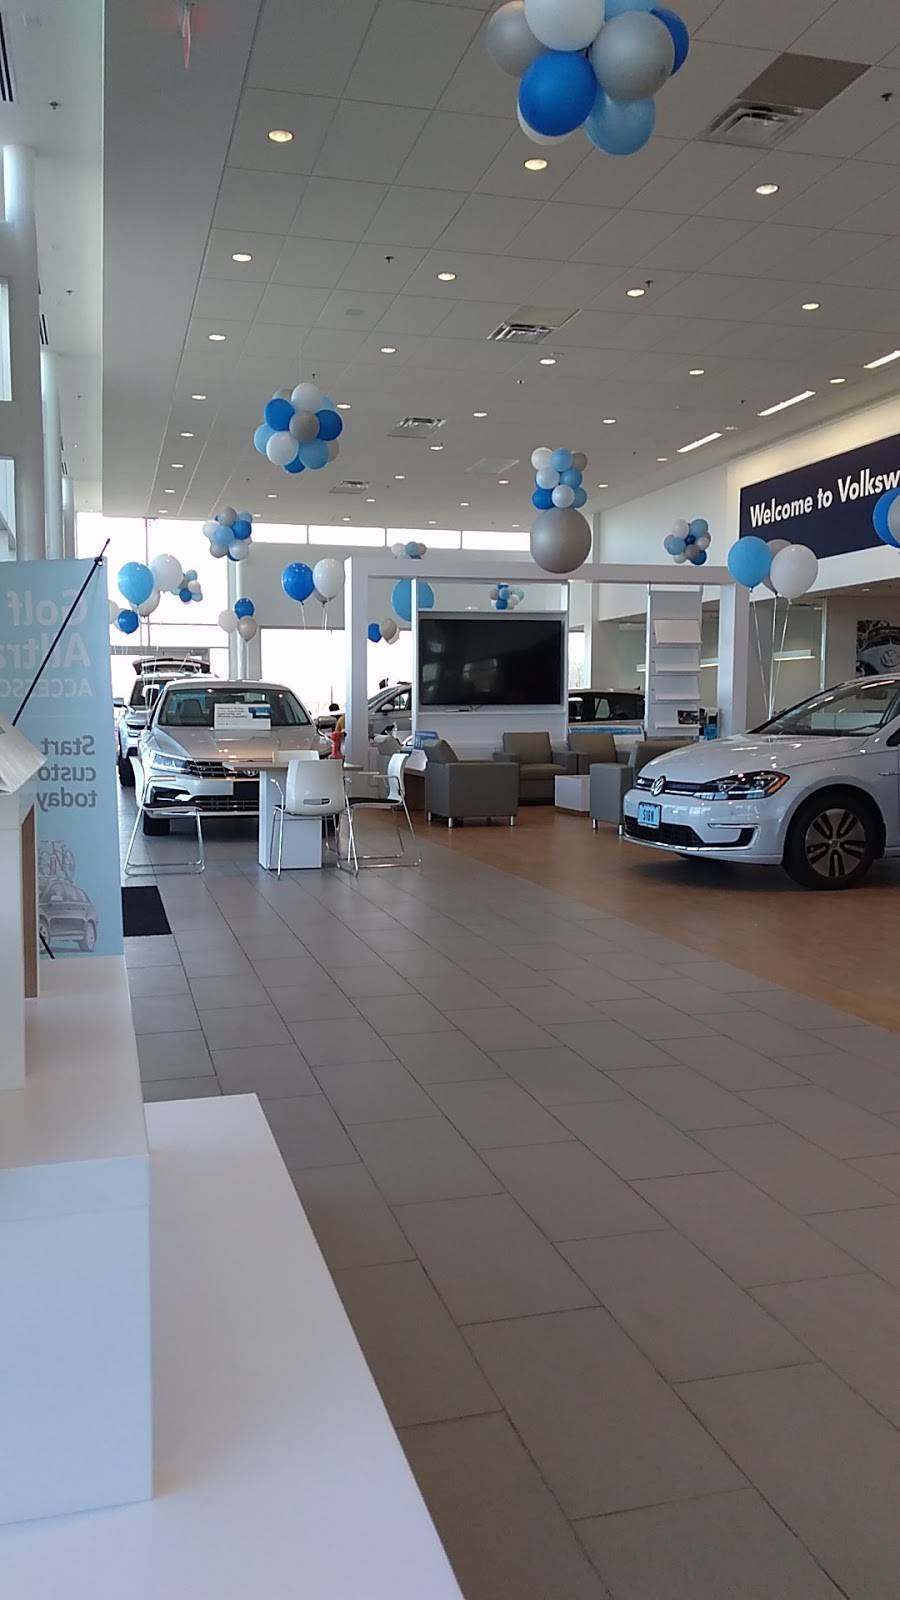 Pohanka Volkswagen | 1720 Ritchie Station Ct, Capitol Heights, MD 20743 | Phone: (301) 808-7100